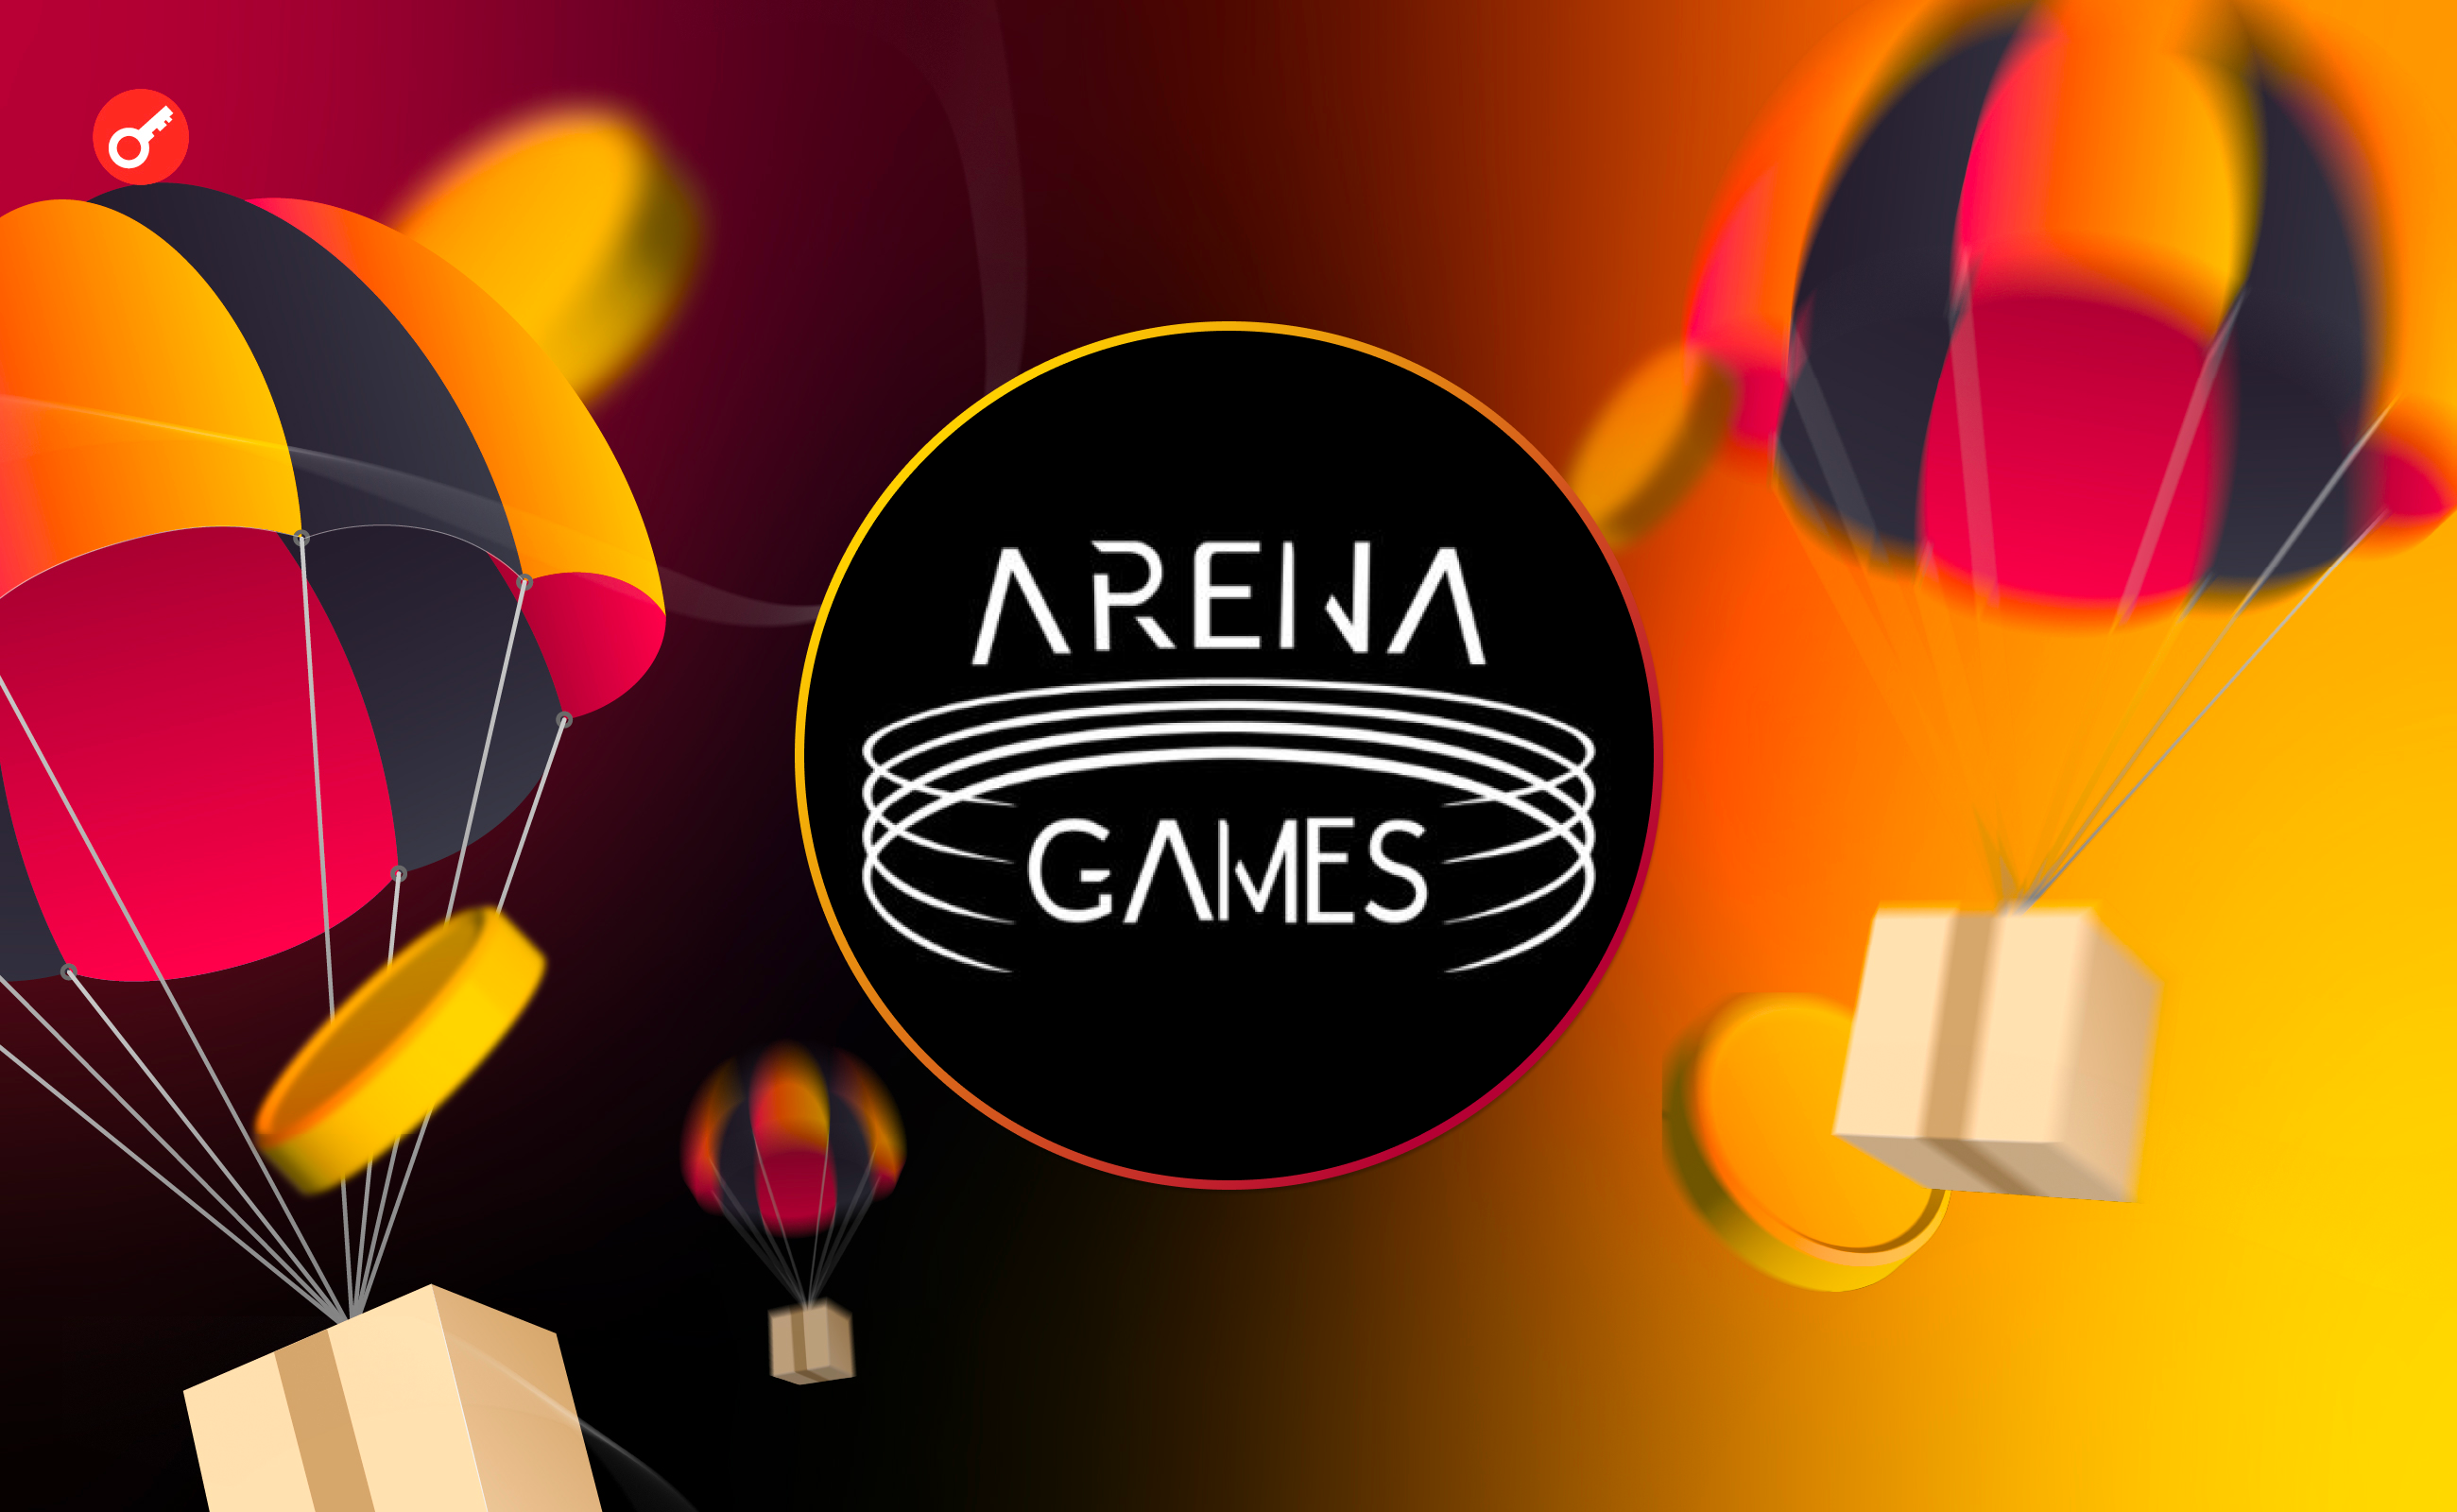 Participate in airdrop campaign of Arena Games project. Заглавный коллаж статьи.